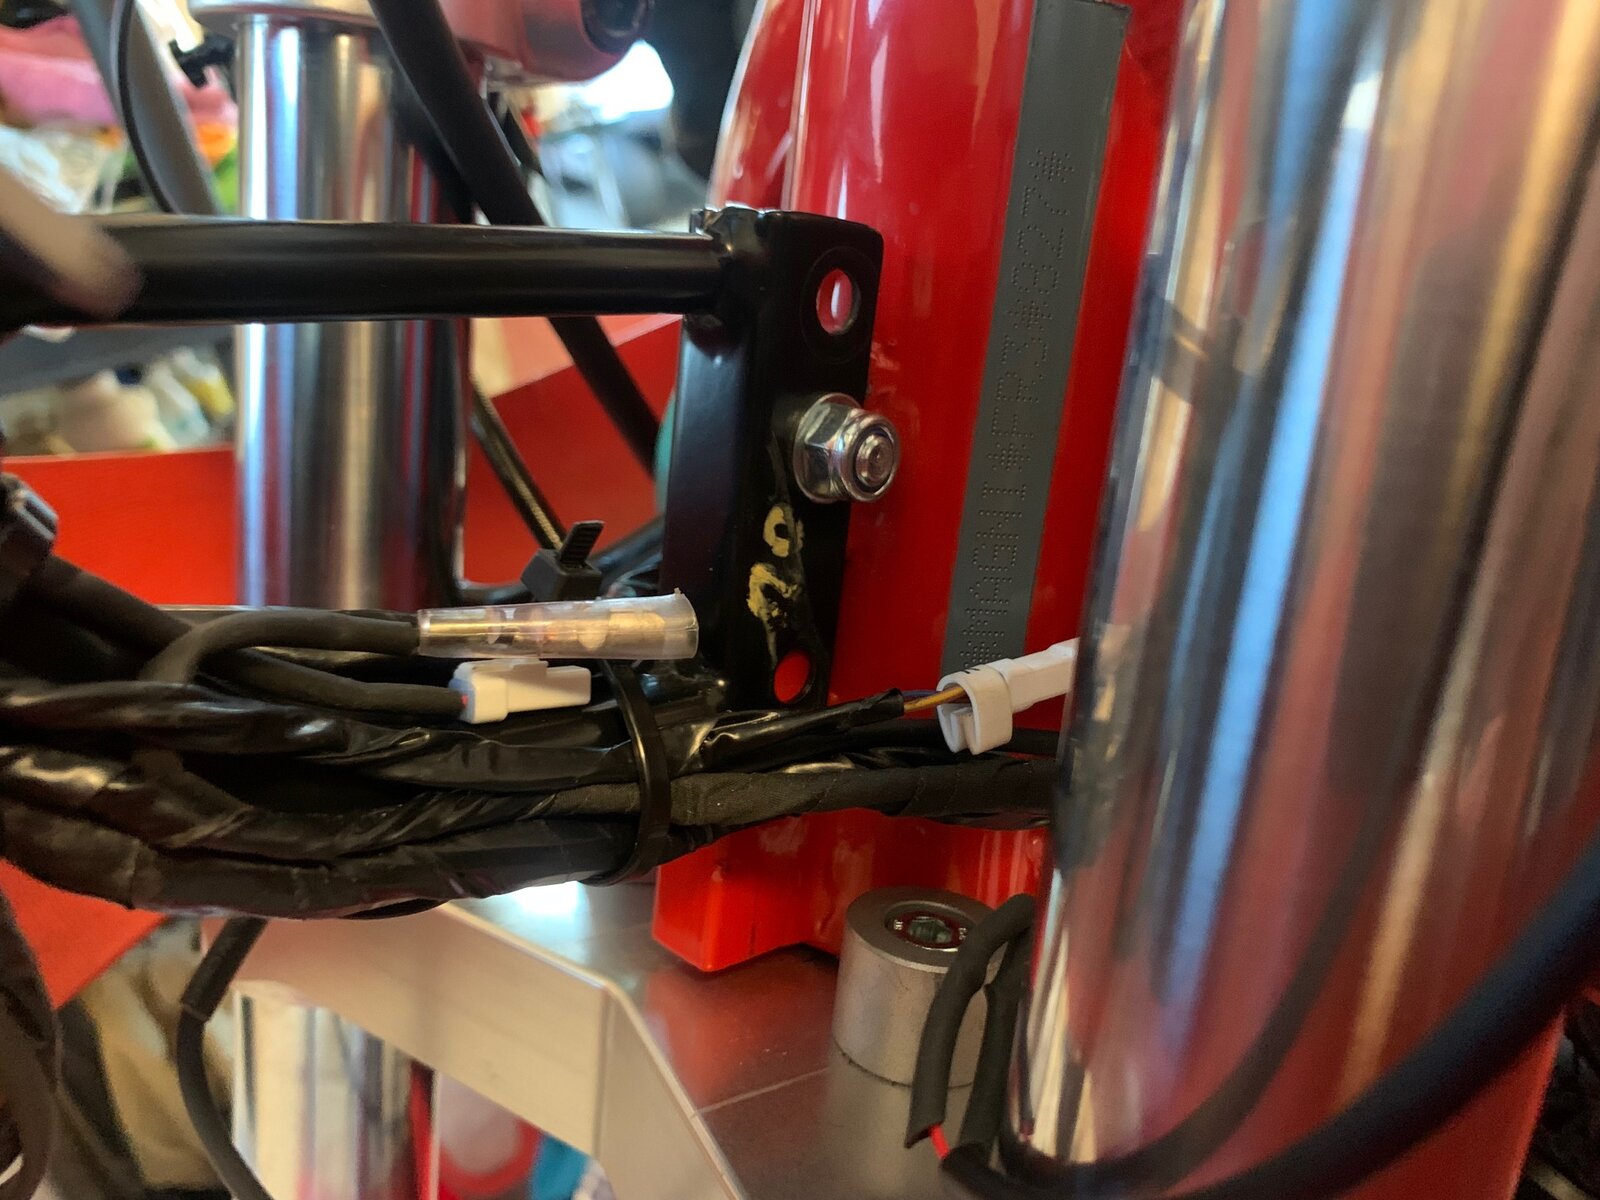 How to adapt a MV Magni for a 71 old disabled rider